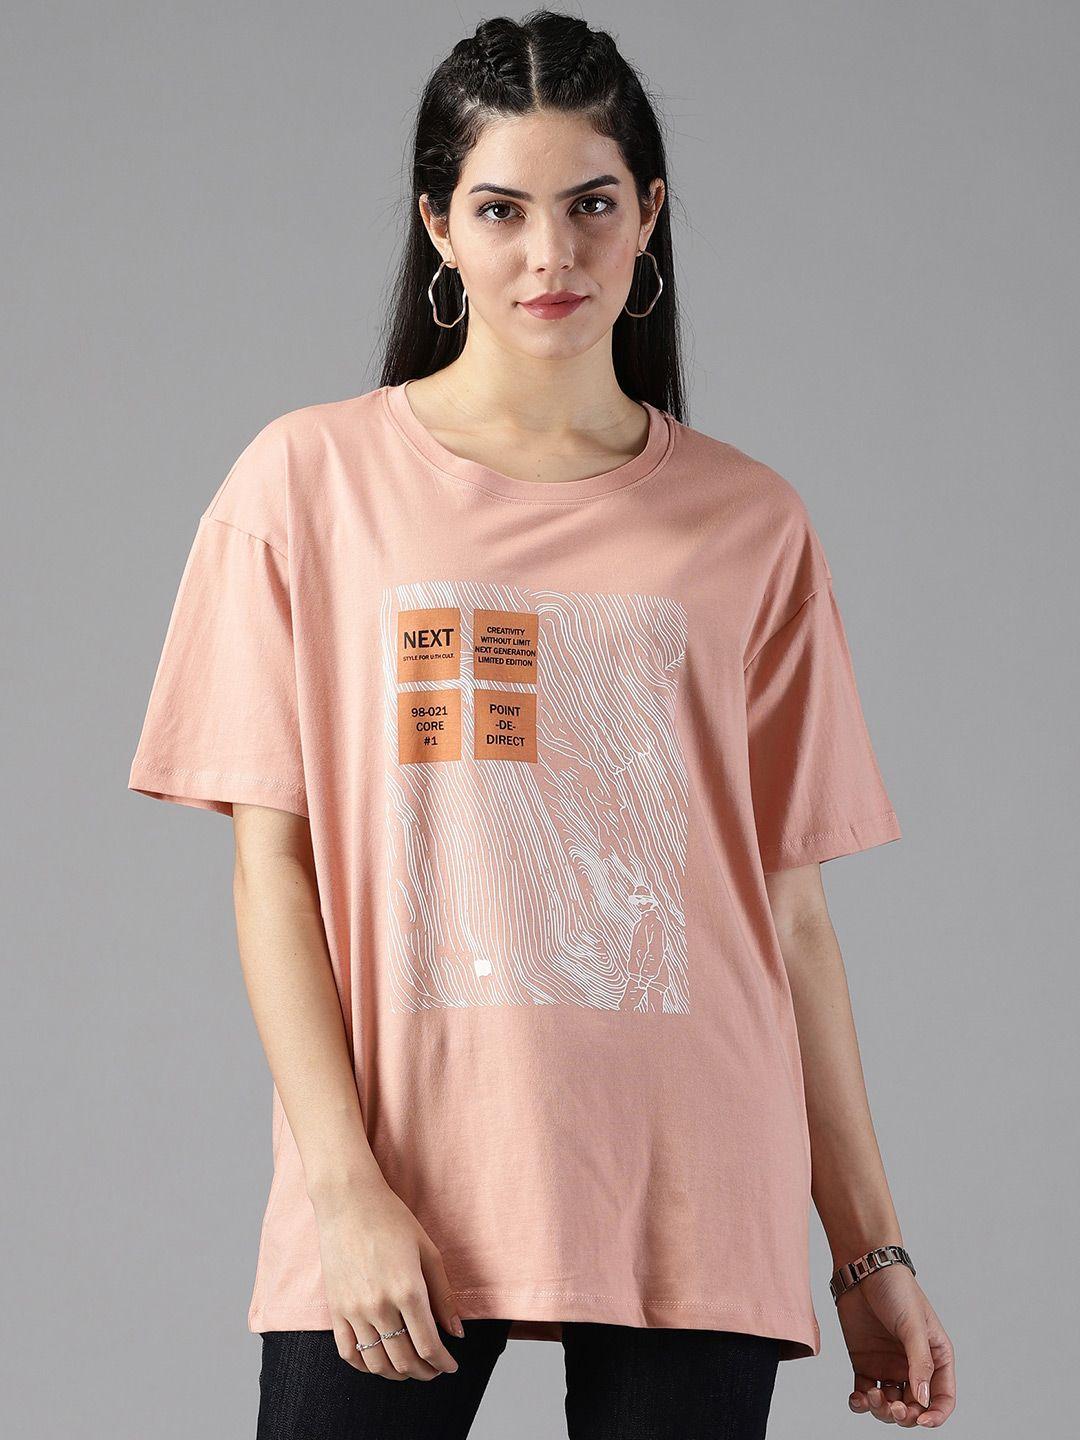 the roadster lifestyle co. printed pure cotton oversized t-shirt